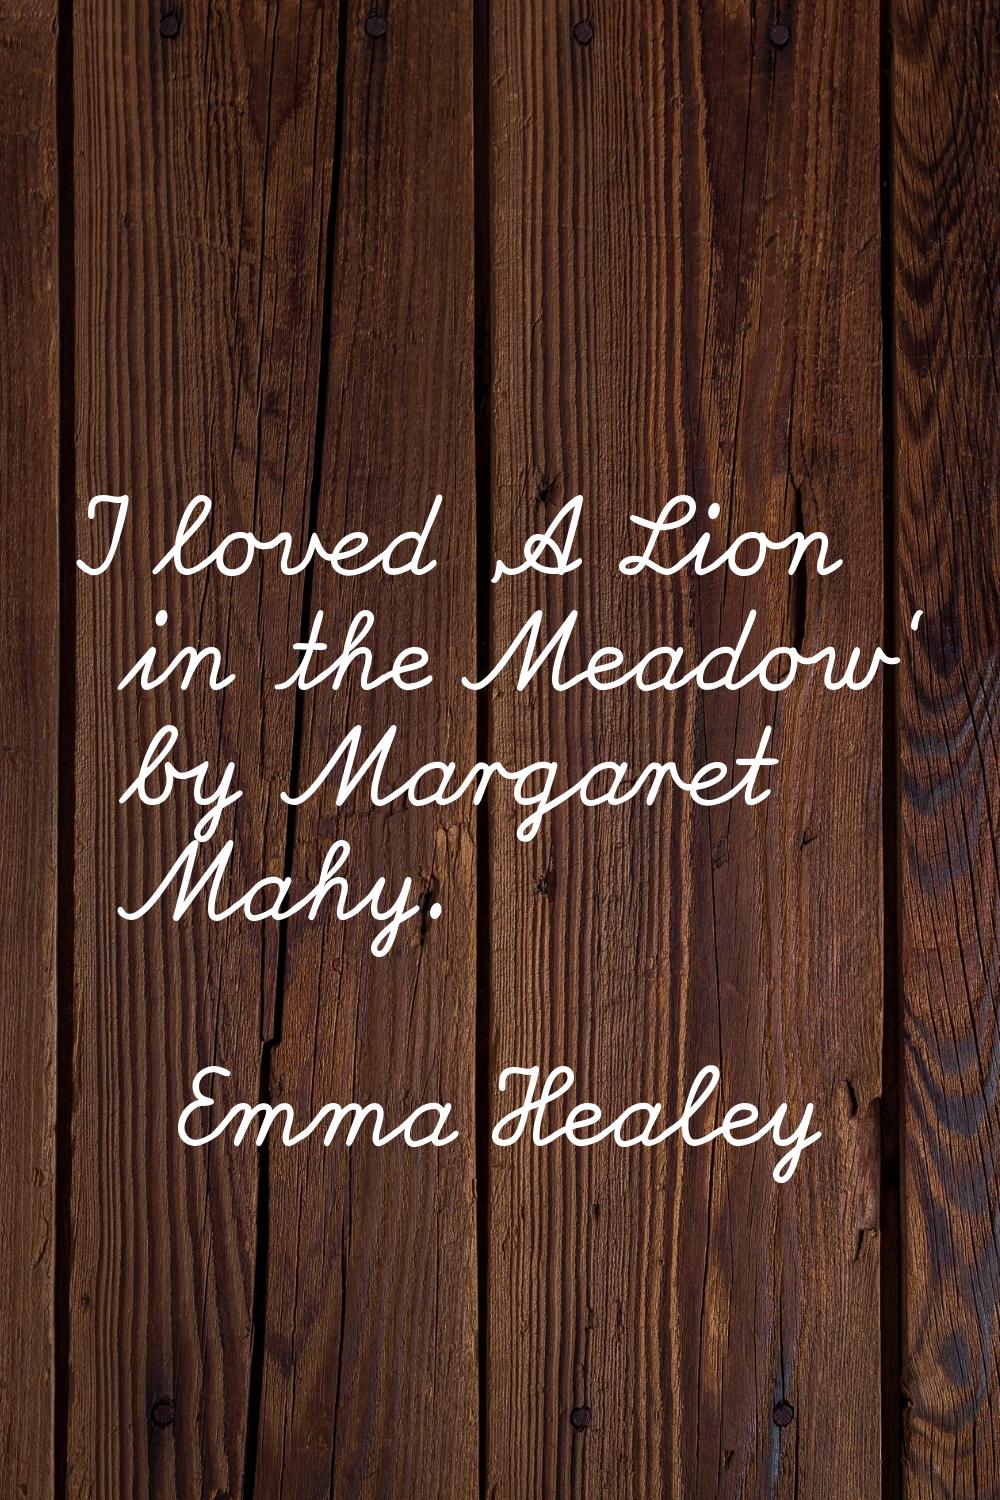 I loved 'A Lion in the Meadow' by Margaret Mahy.